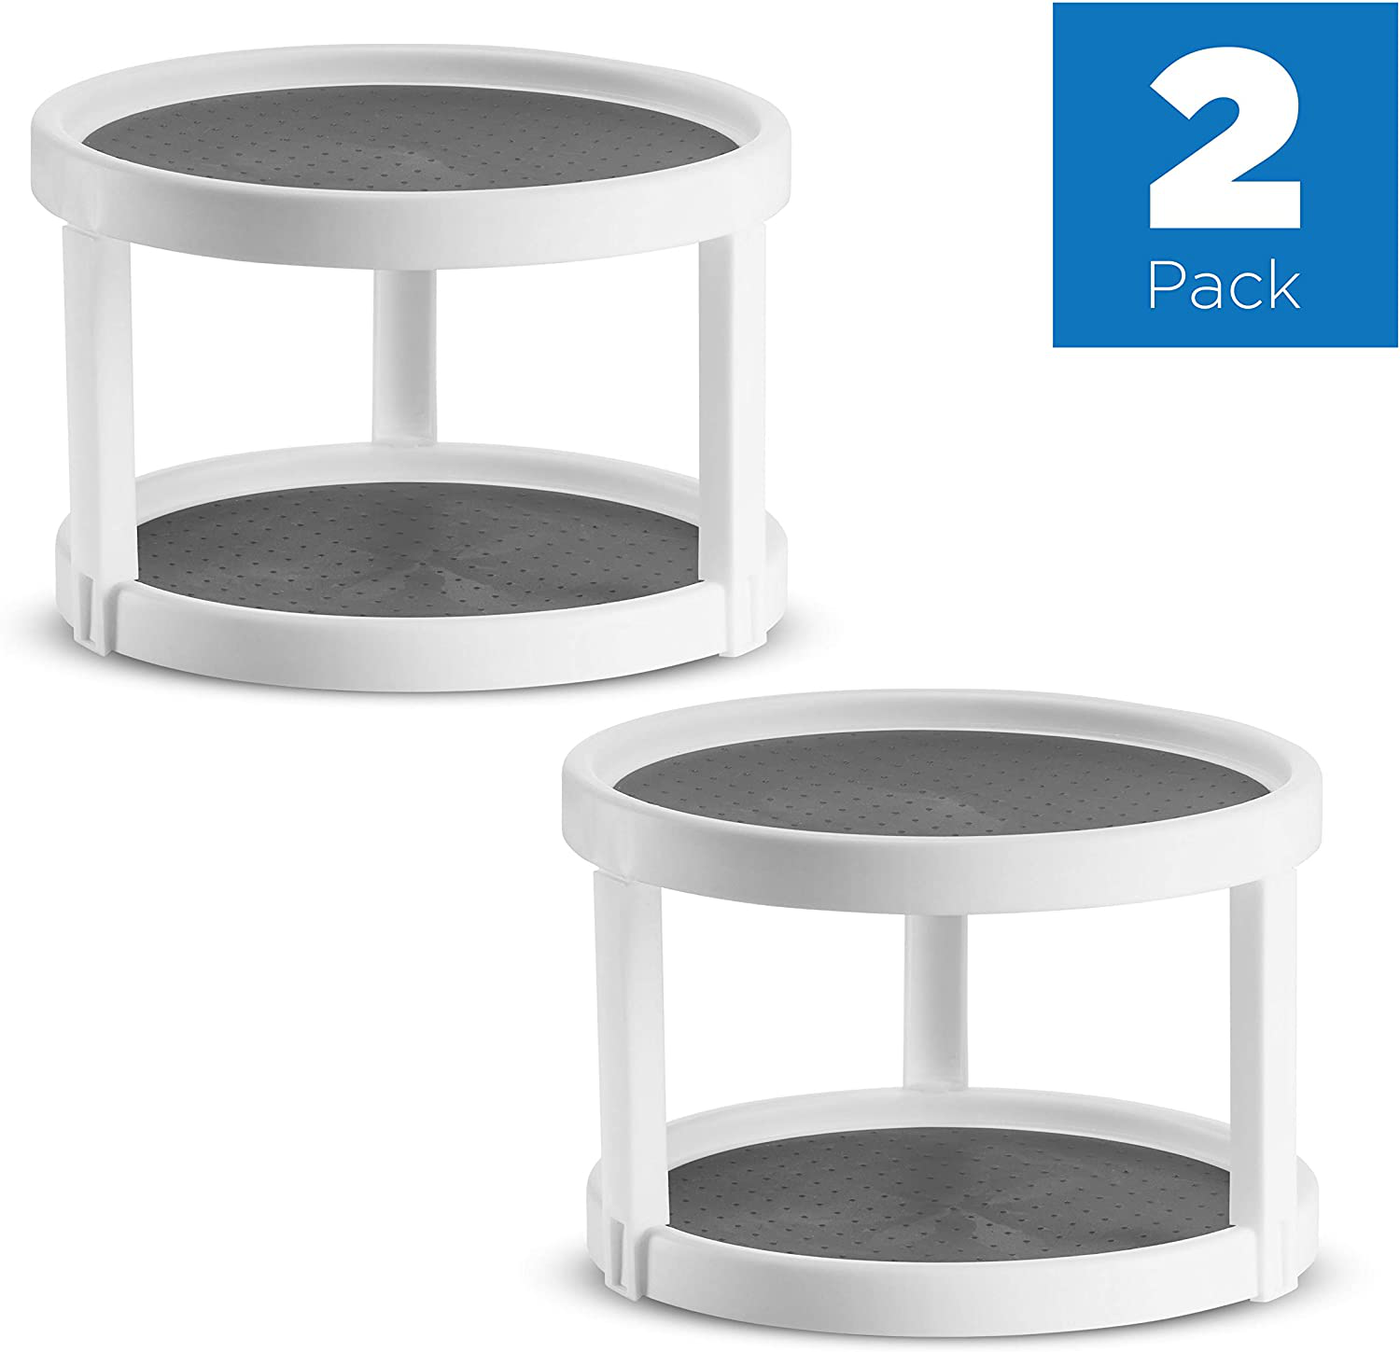 2 Pack Non Skid Lazy Susan Turntable Cabinet Organizer with 10 Inch Spinning Carousal